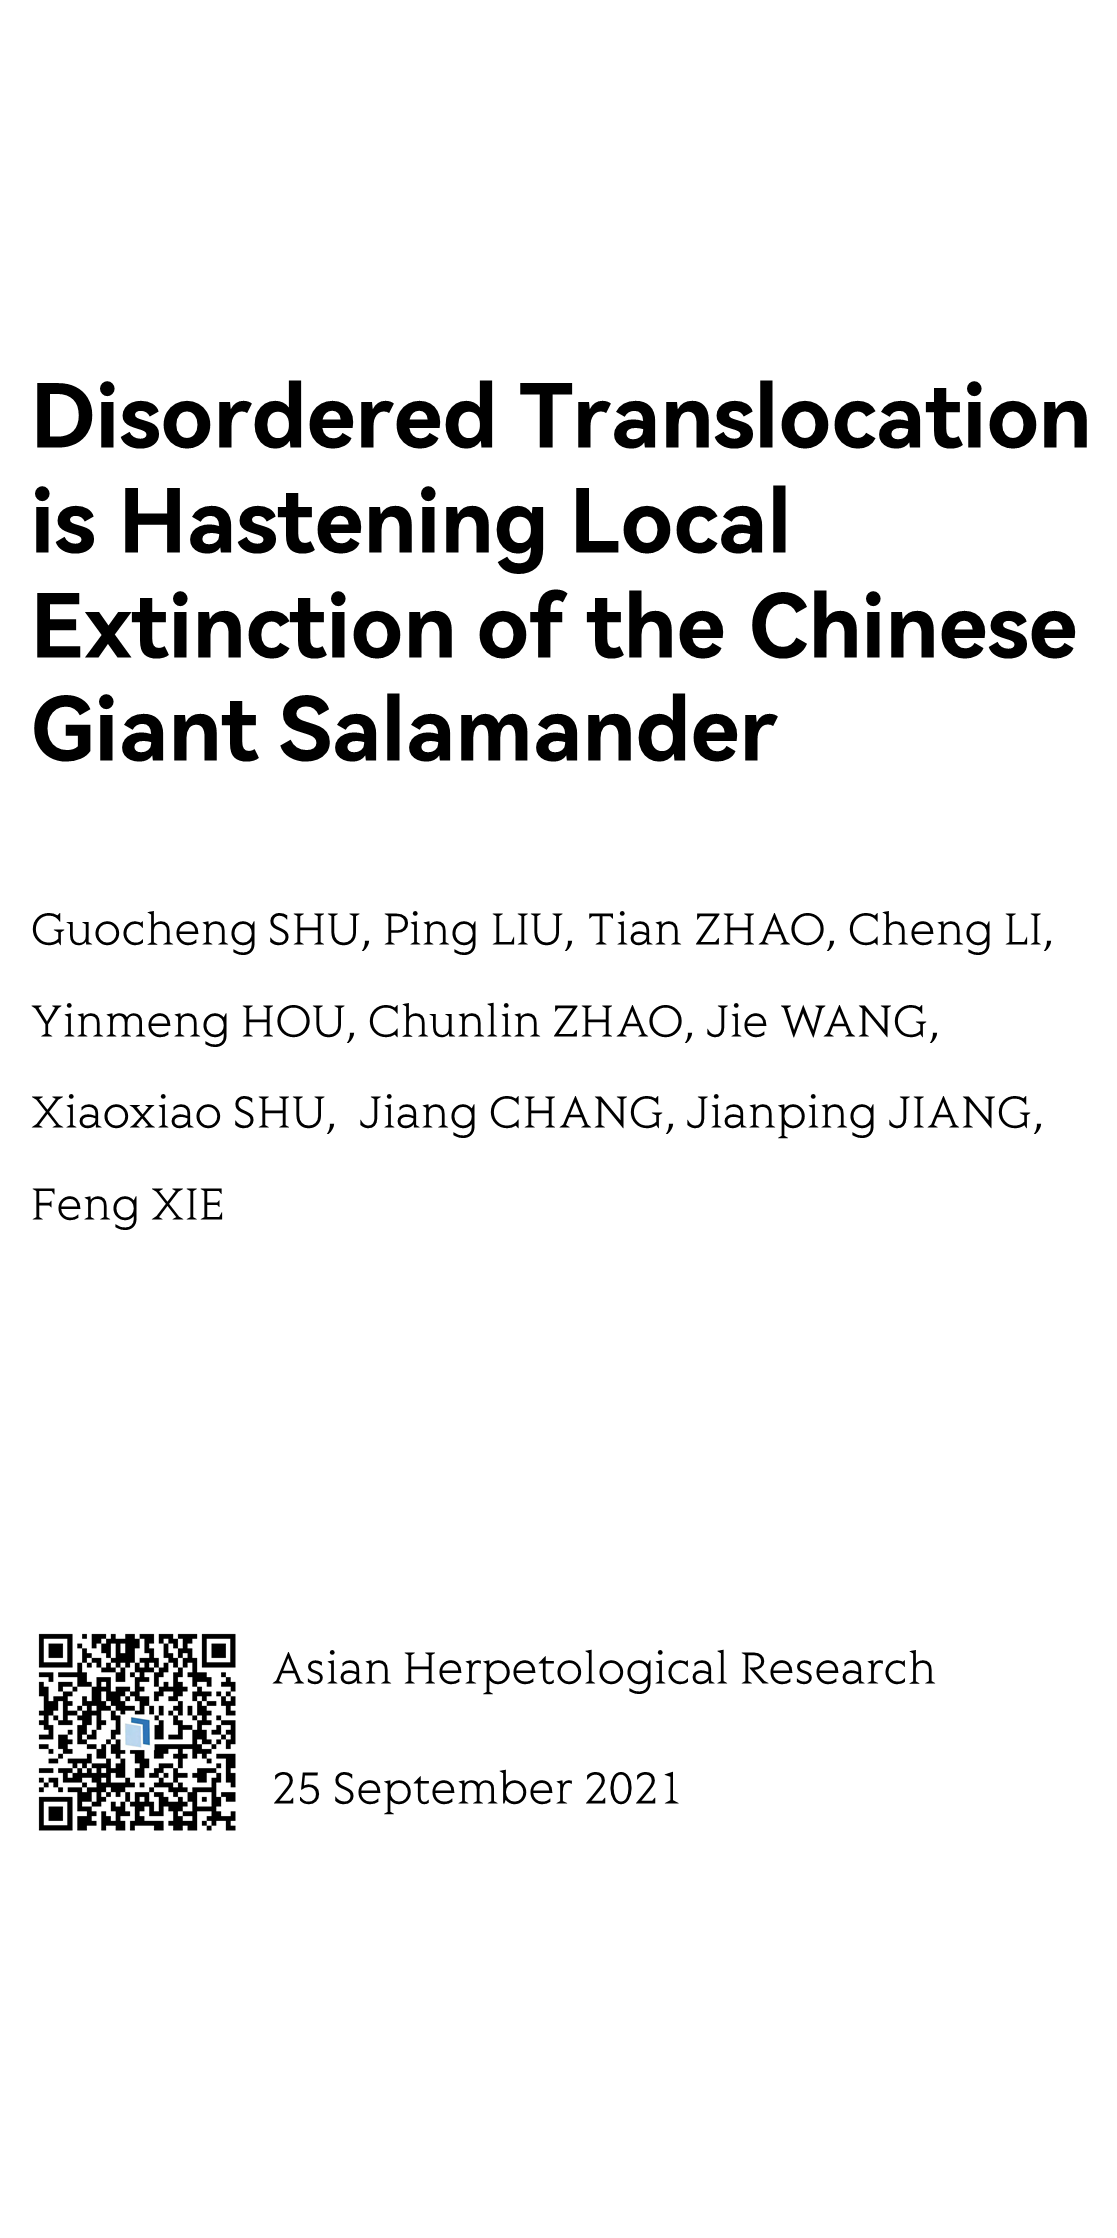 Disordered Translocation is Hastening Local Extinction of the Chinese Giant Salamander_1